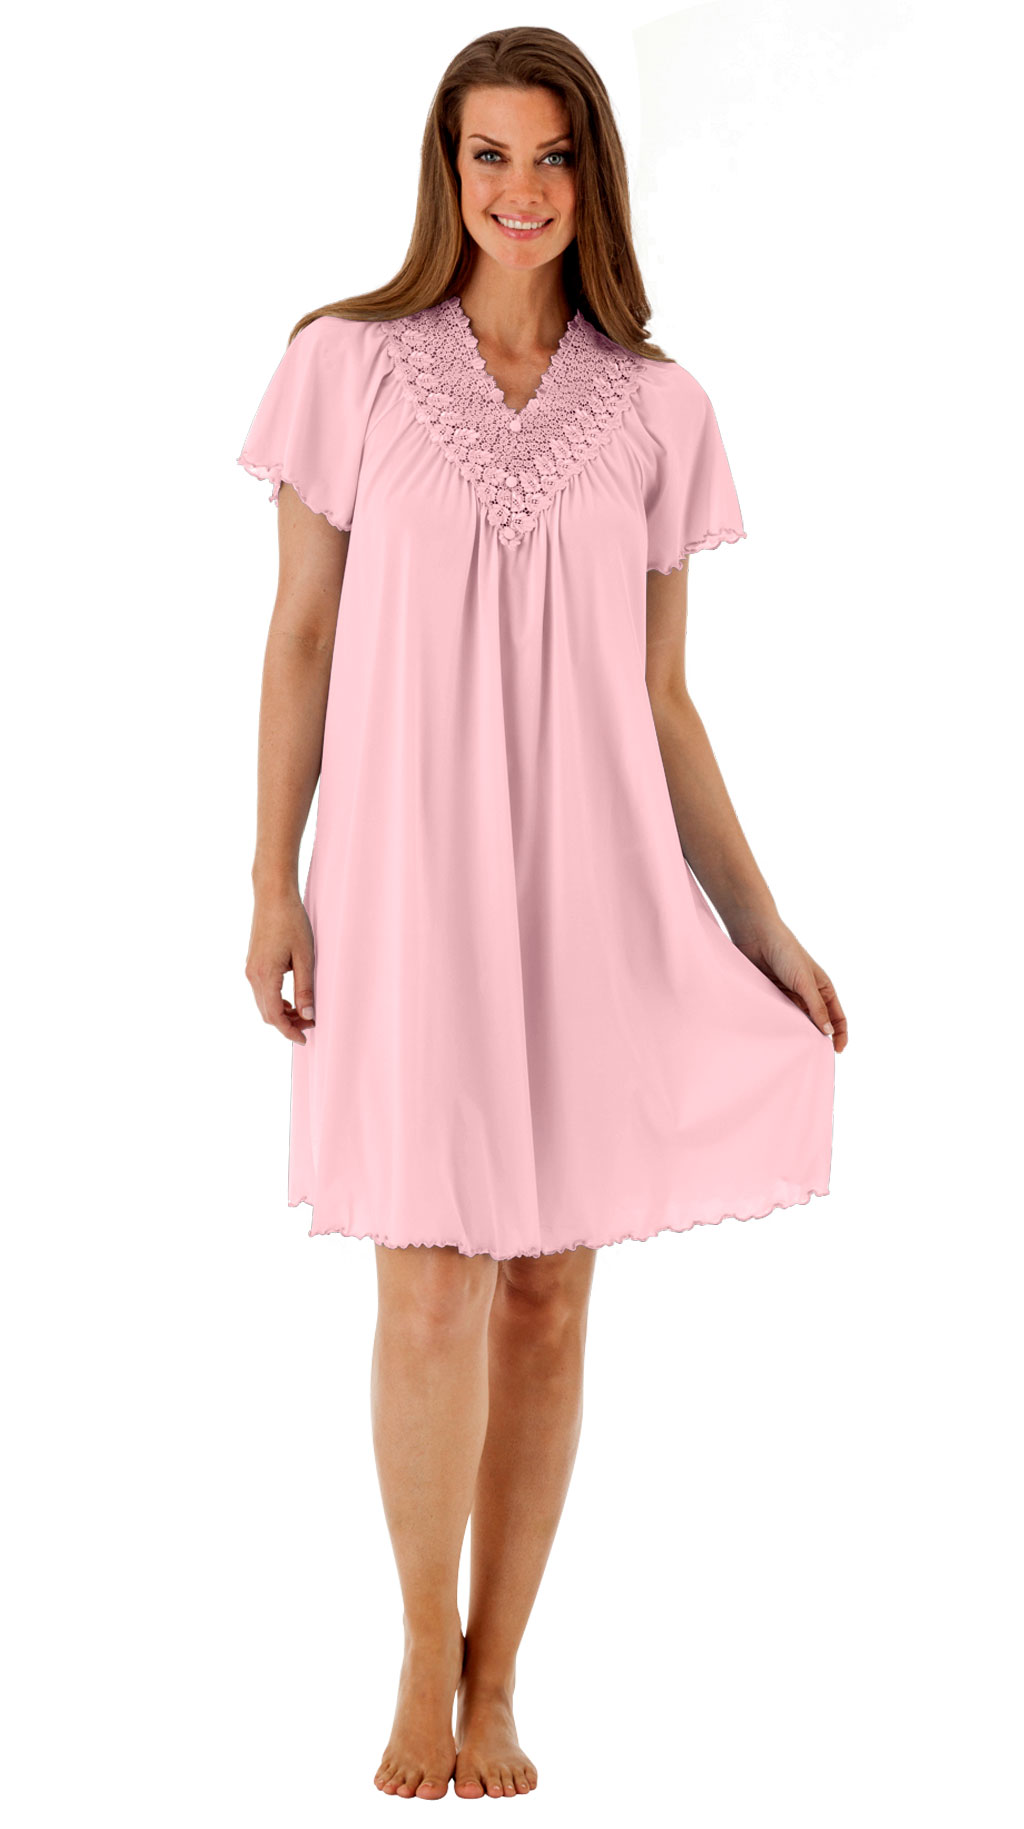 Women's Short Embroidered Lace Nightgown